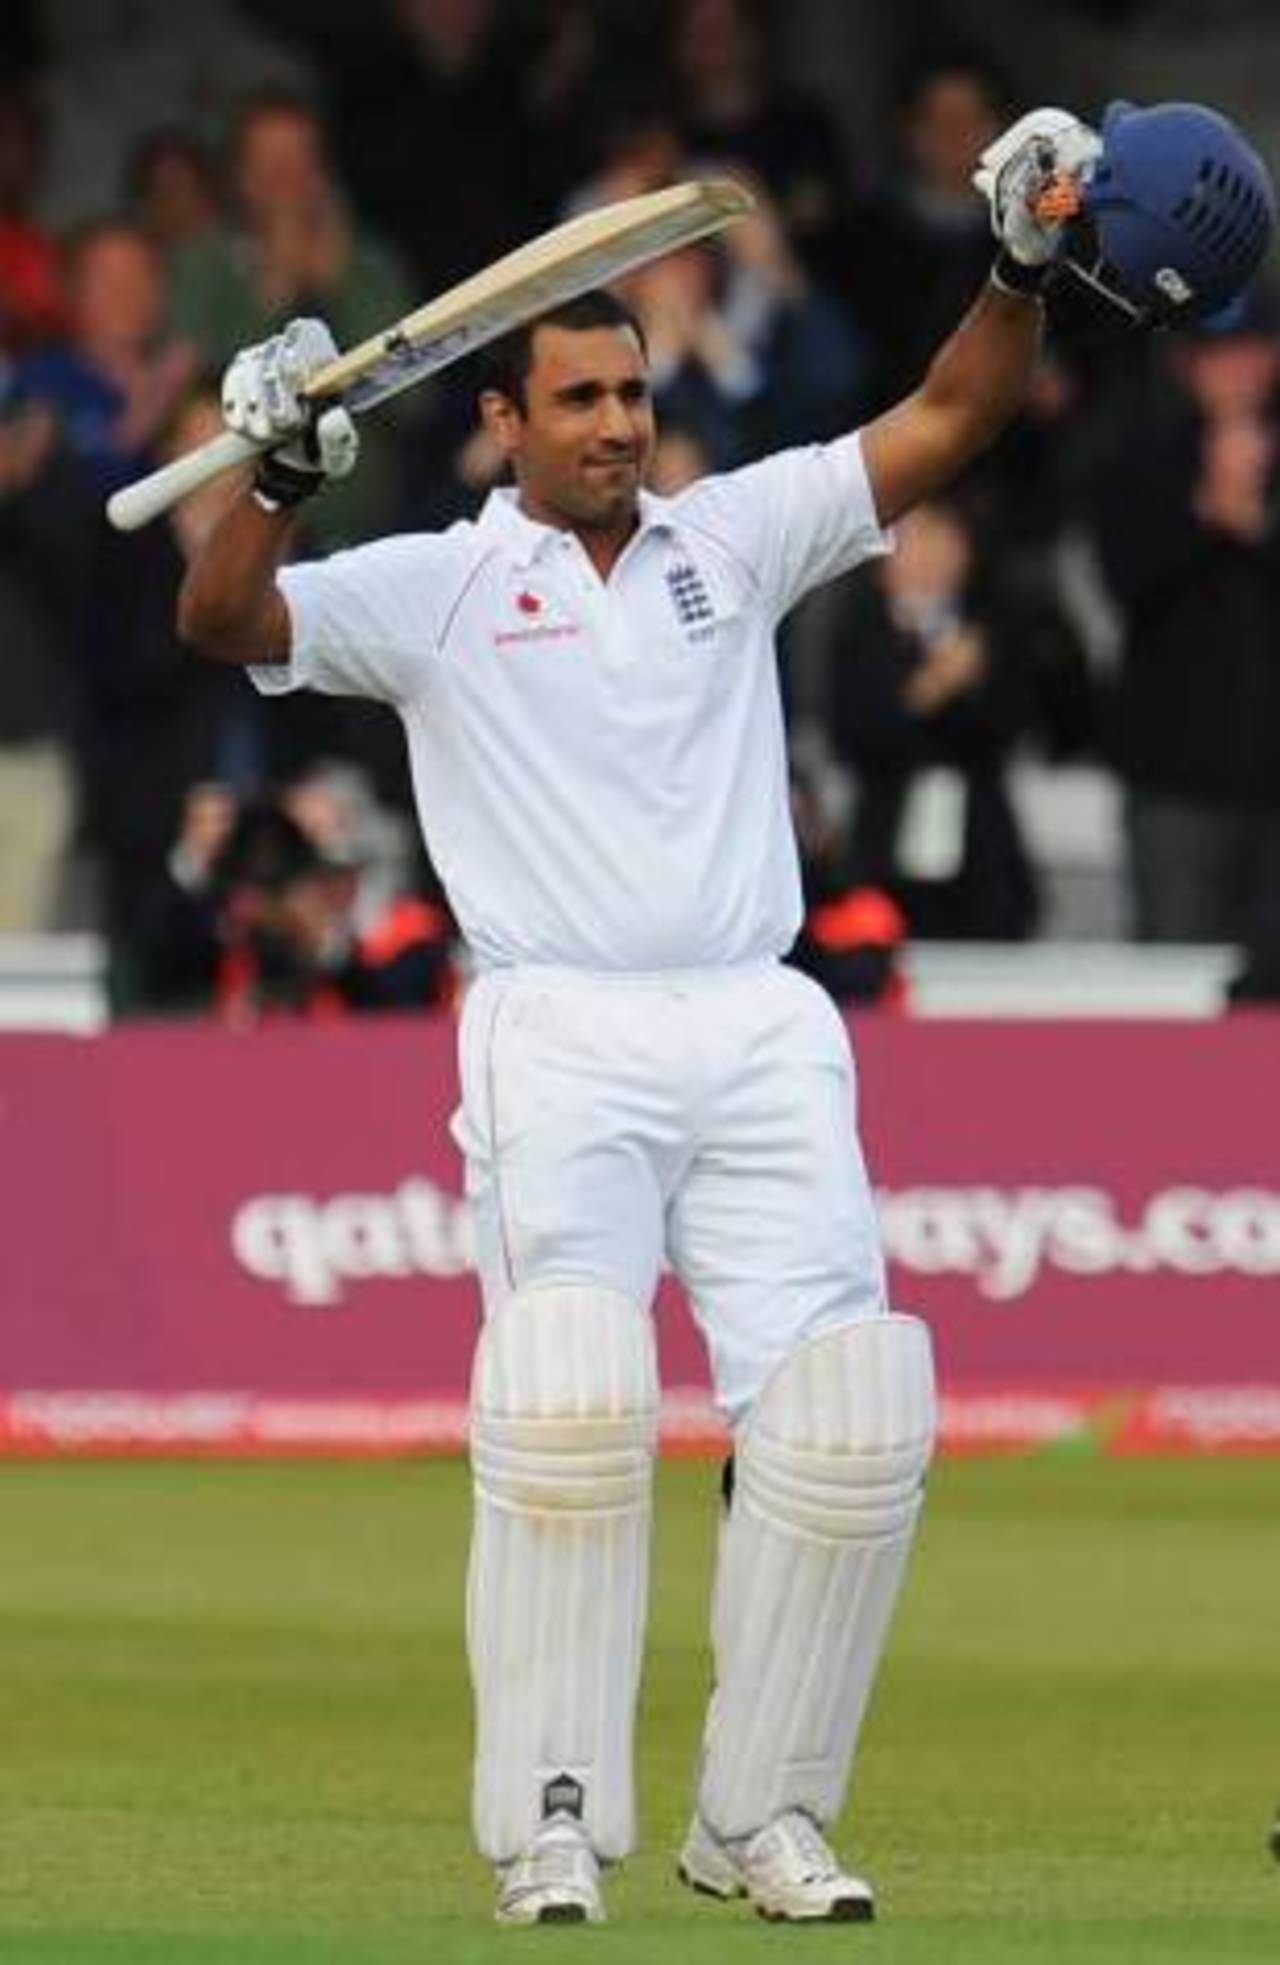 Ravi Bopara signals to the dressing room after reaching his hundred, England v West Indies, 1st Test, Lord's, May 6, 2009